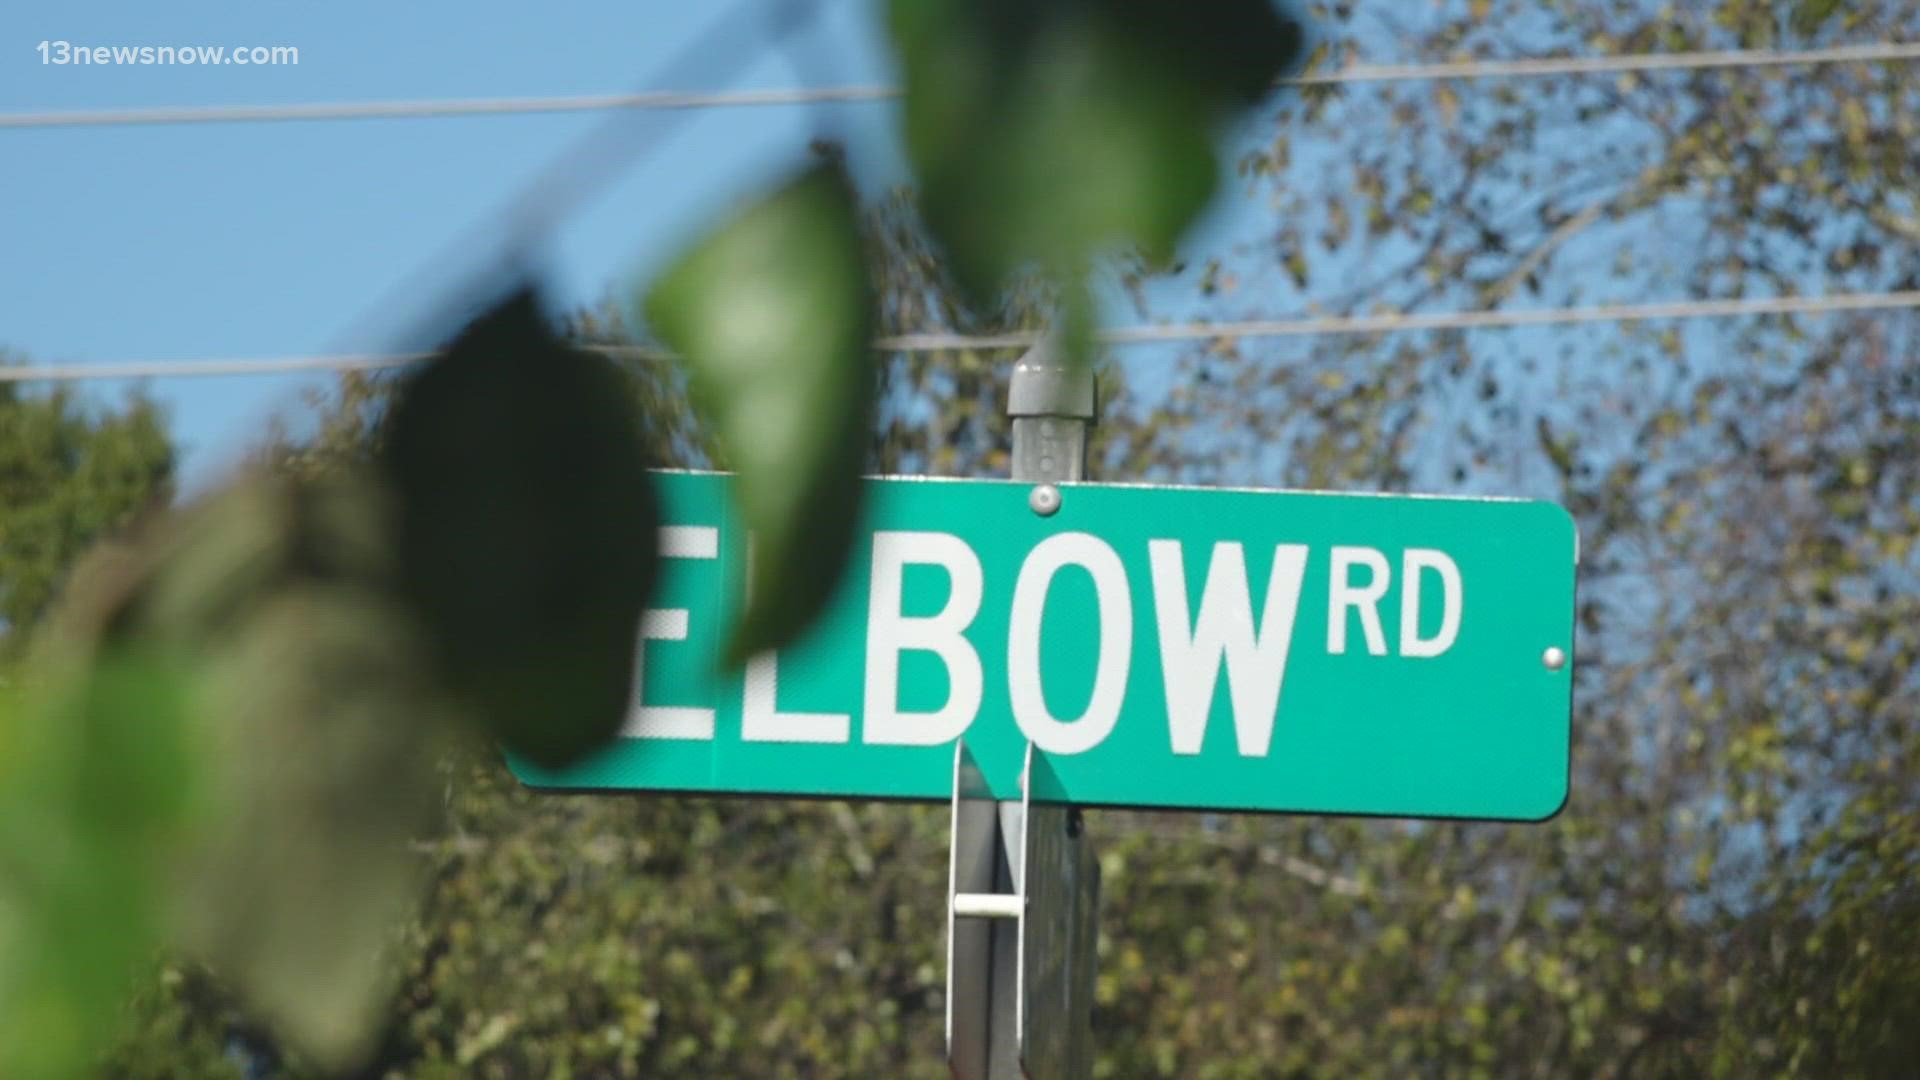 After years of planning, city leaders secured the cash to fix Elbow Road, which connects Virginia Beach with Chesapeake.